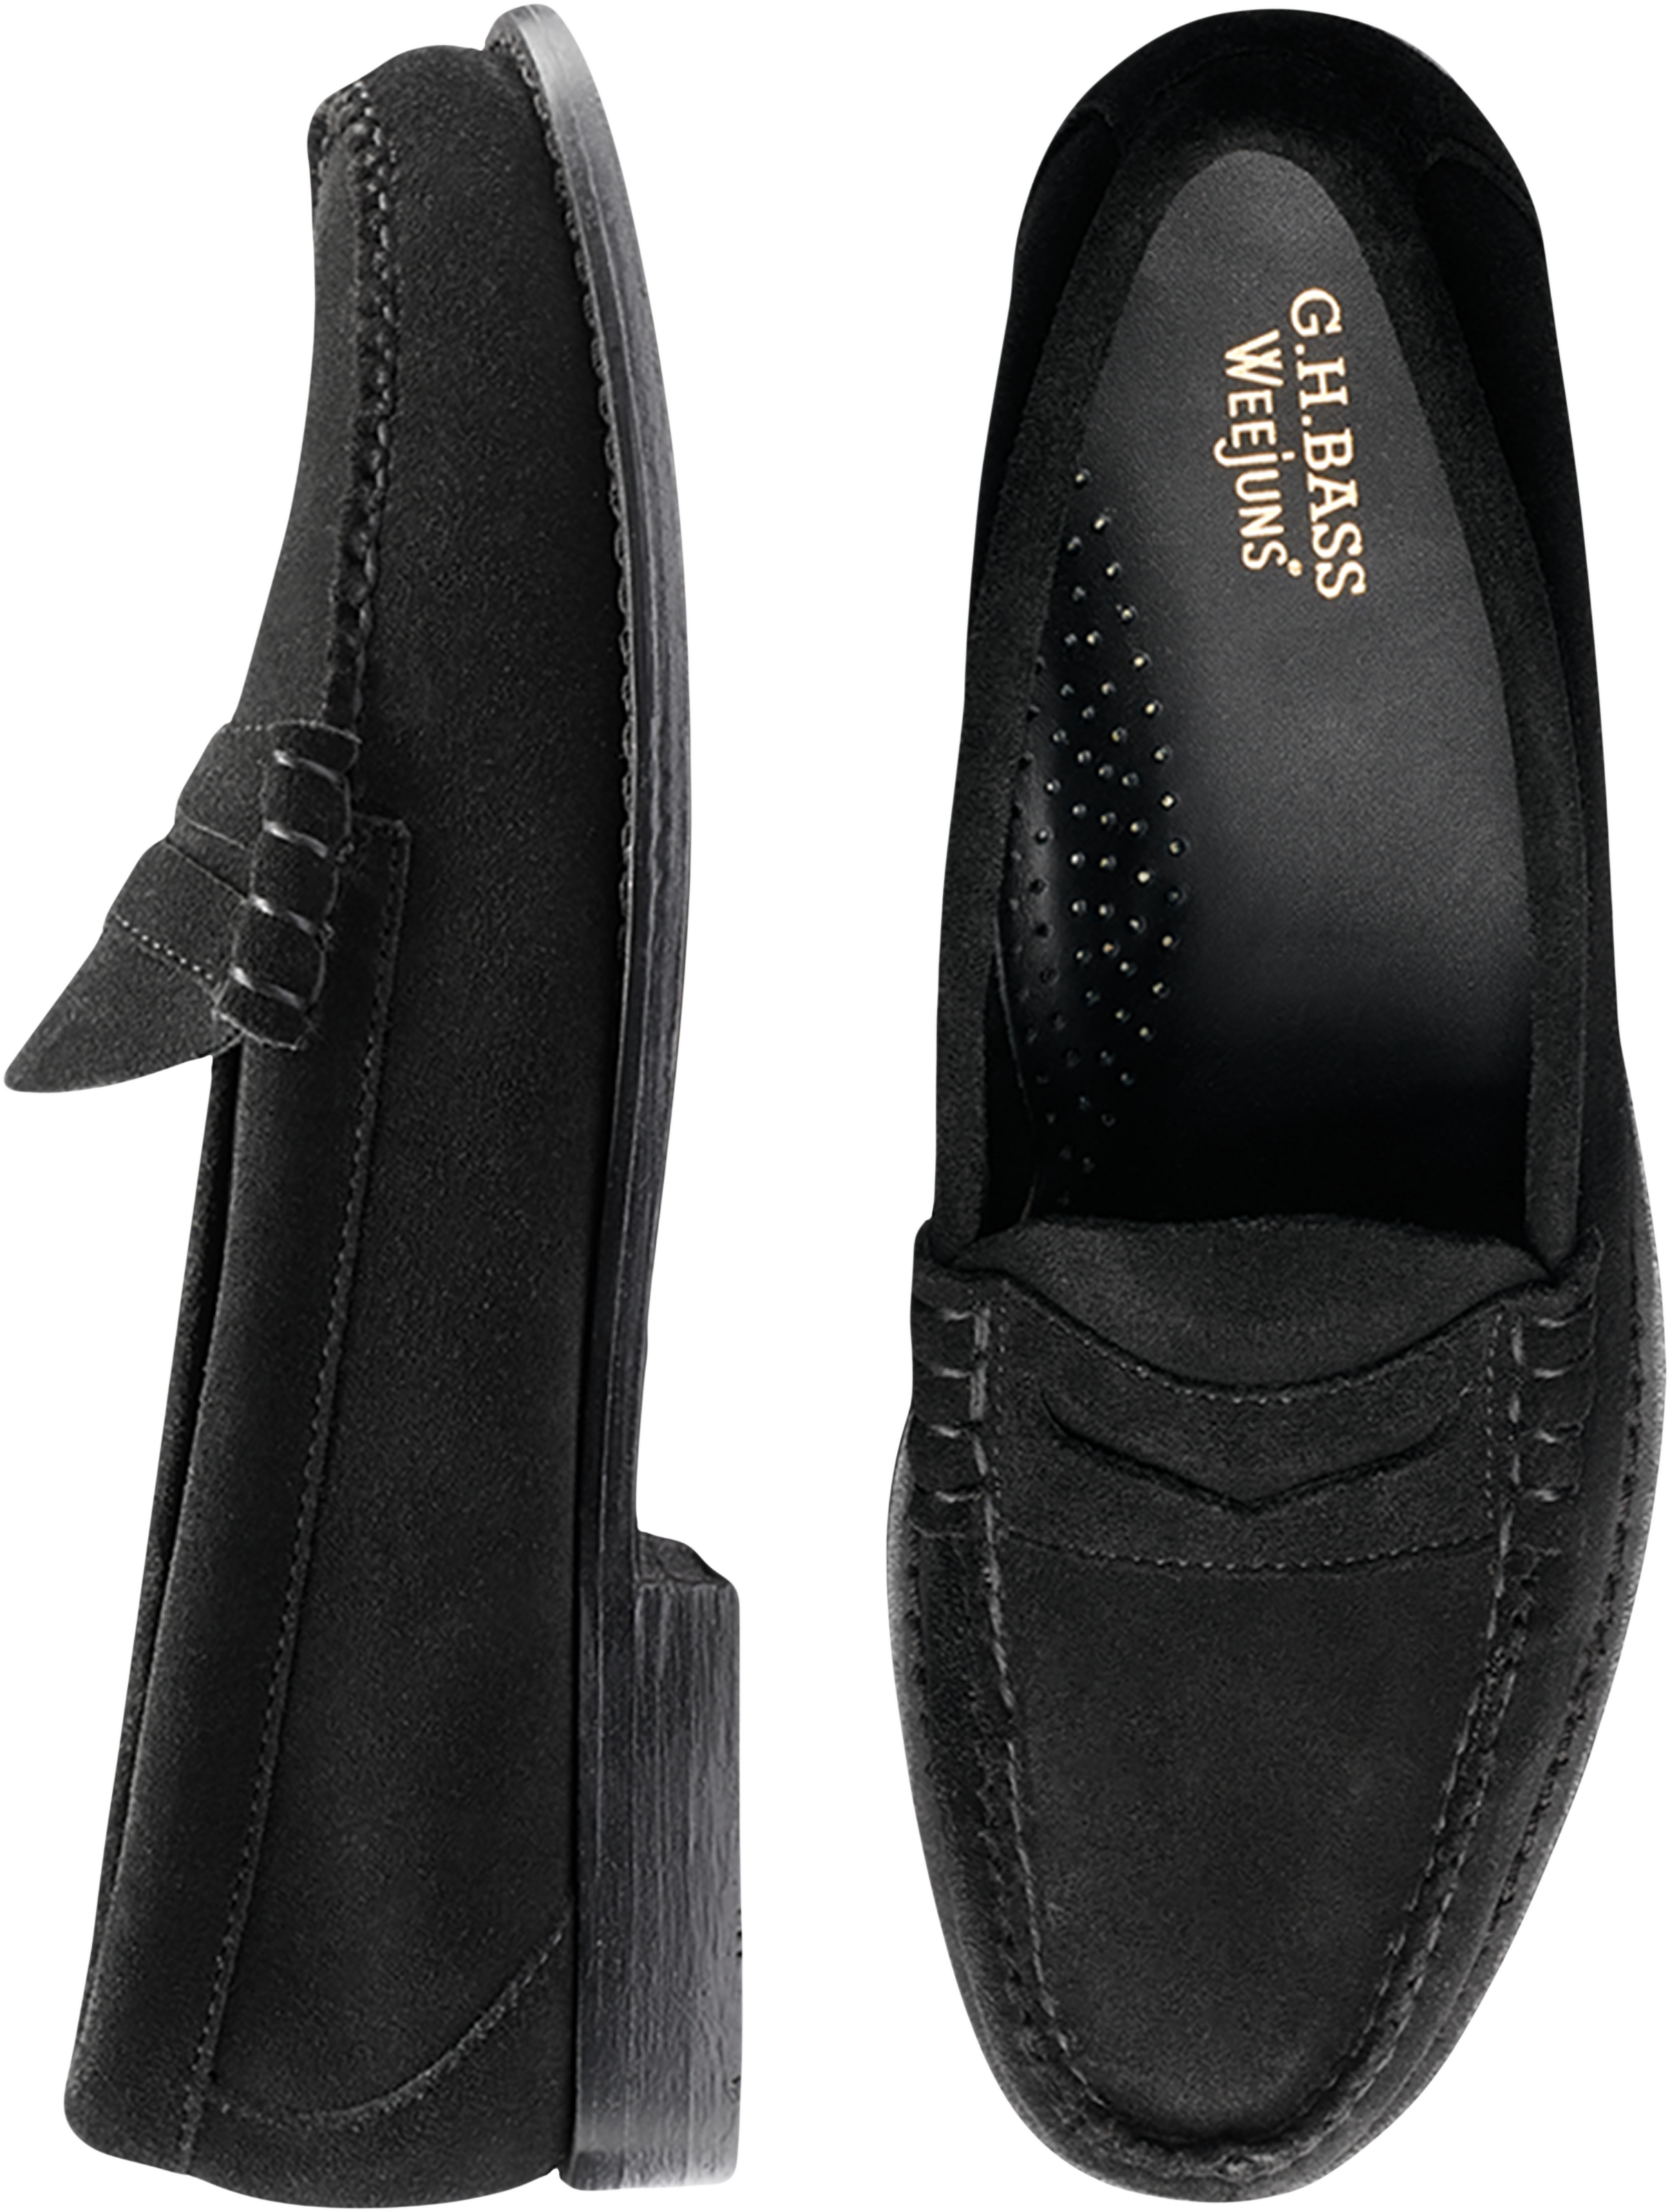 Larson Weejuns®  Moc-Toe Slip-On Suede Loafers